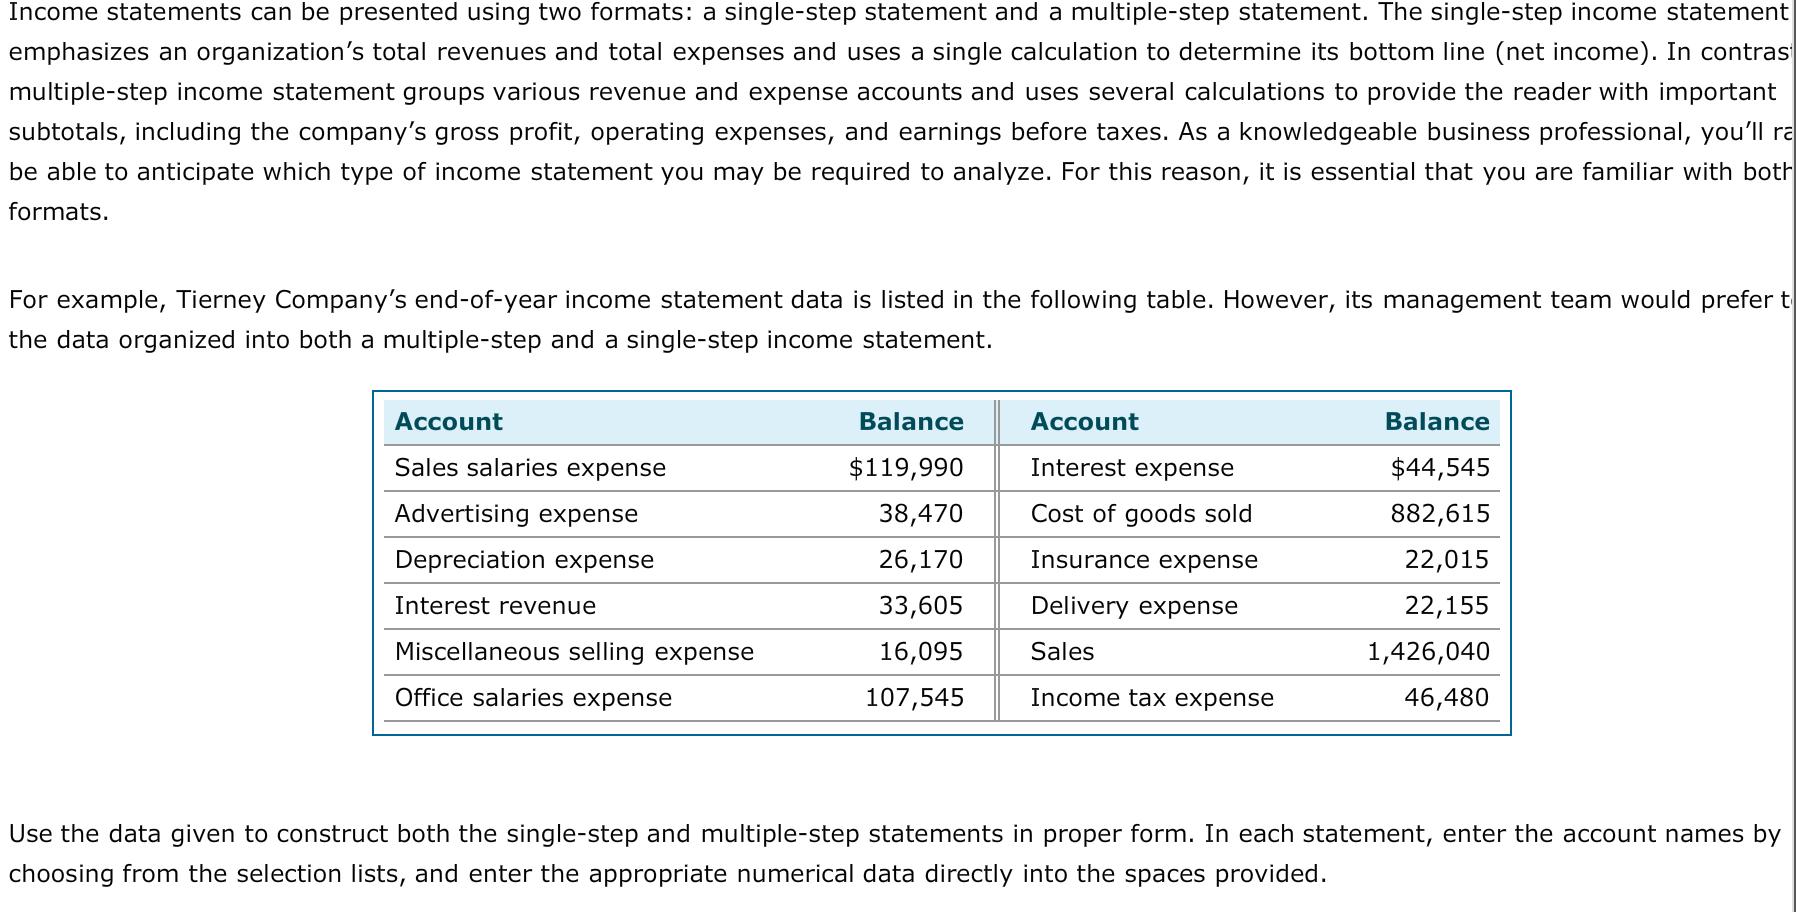 Income statements can be presented using two formats: a single-step statement and a multiple-step statement. The single-step